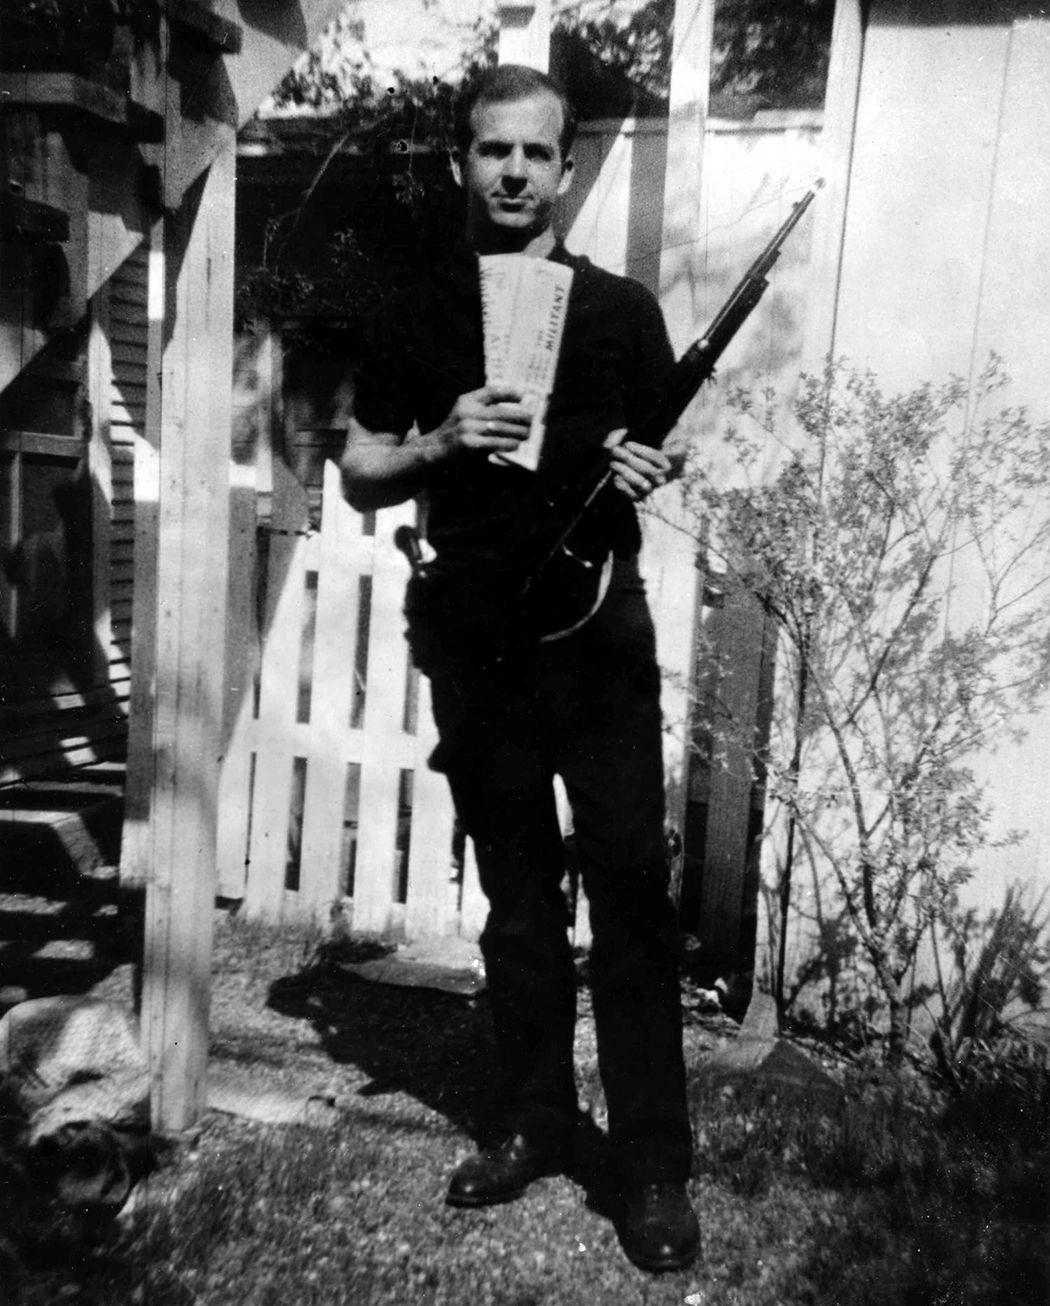 Lee Harvey Oswald in the backyard of 214 W. Neely, the duplex where he lived with wife, Marina, who took the infamous photo.(Photos courtesy of the Texas Panhandle Plains Museum, the Dallas PUblic Library and the Dallas Municipal archives)